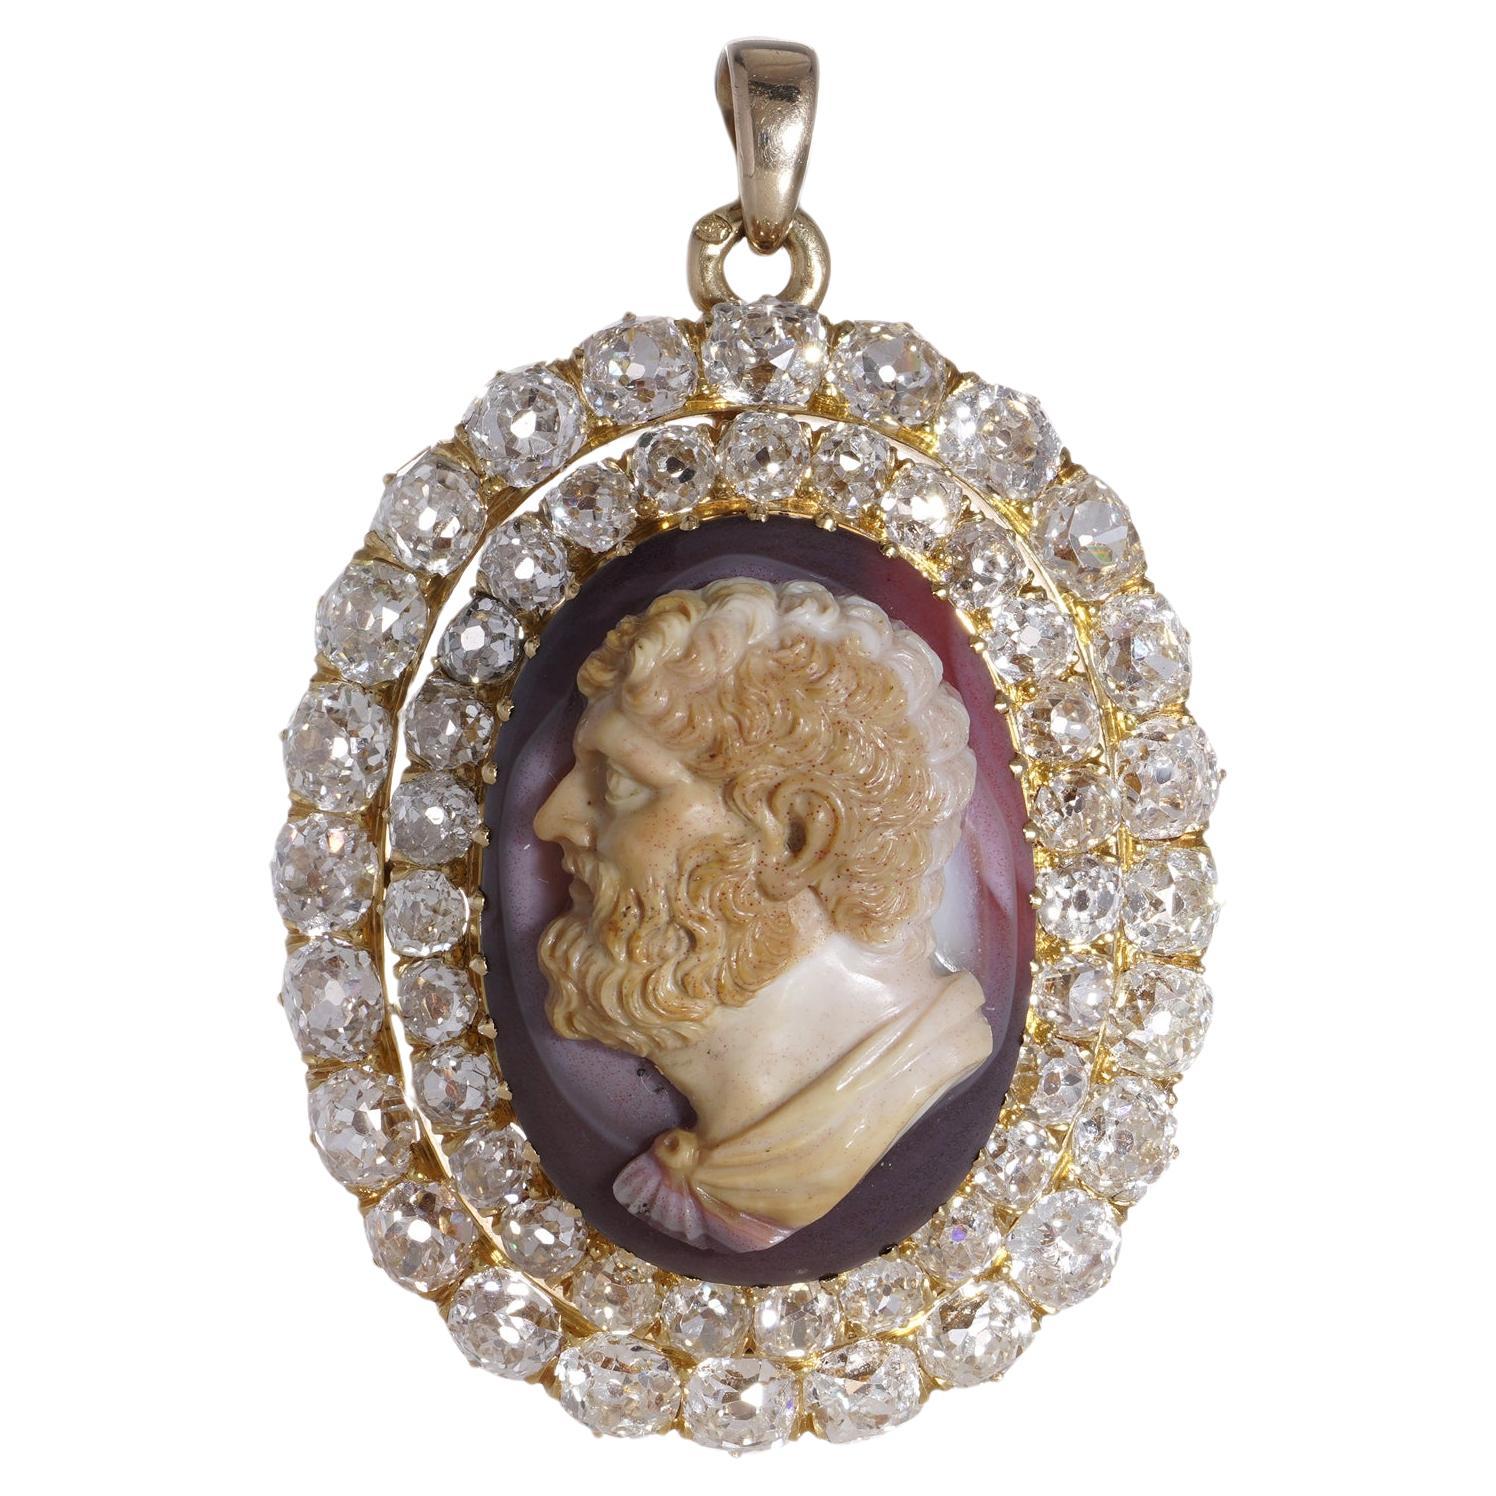 Victorian Banded Agate Cameo of Hercules in an 18kt gold and diamond set pendant